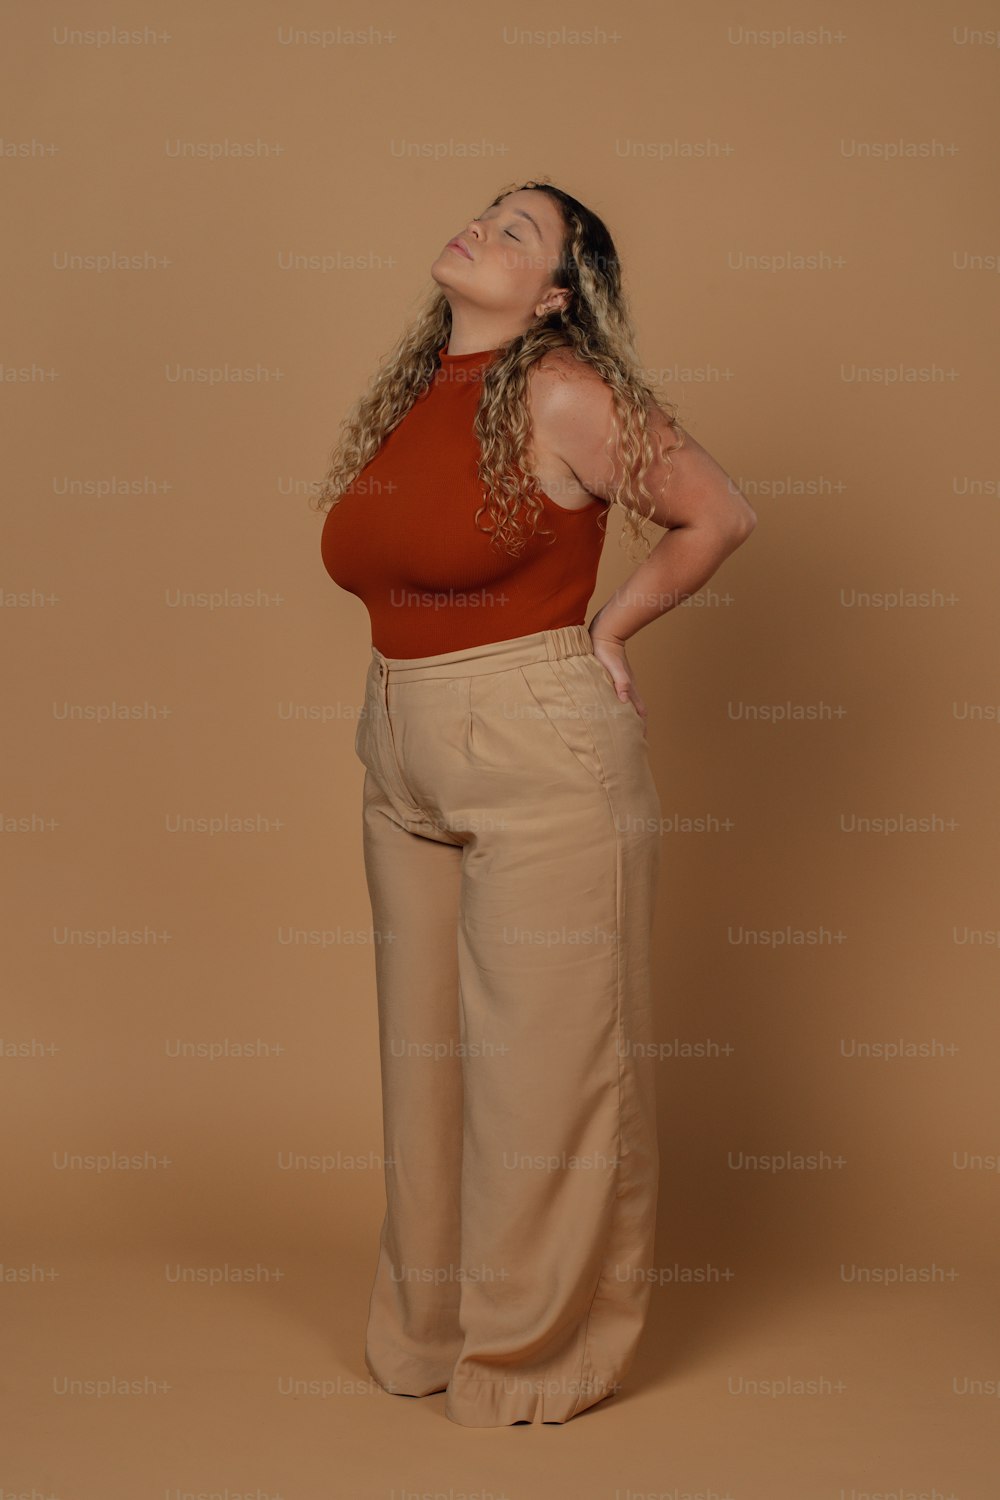 a woman in a red top and tan pants